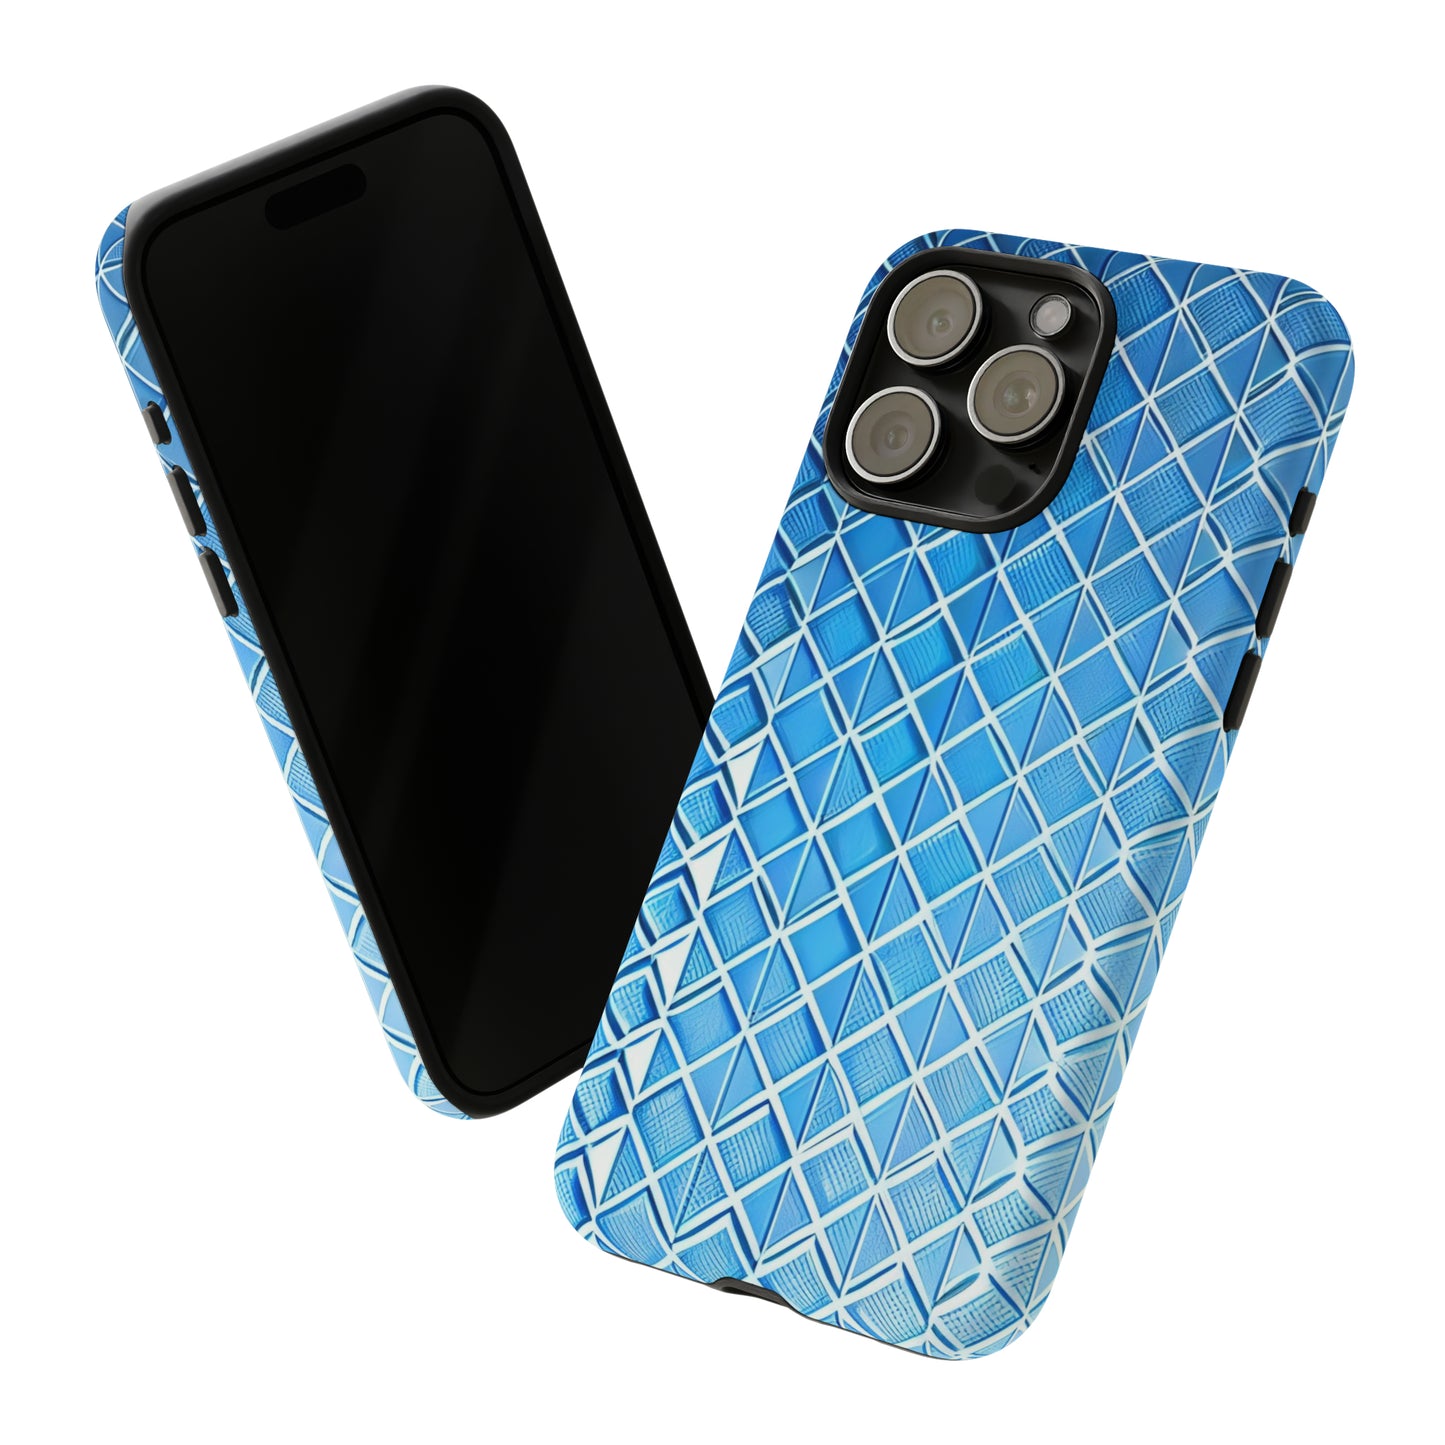 Blue and White Pattern Tough Phone Case